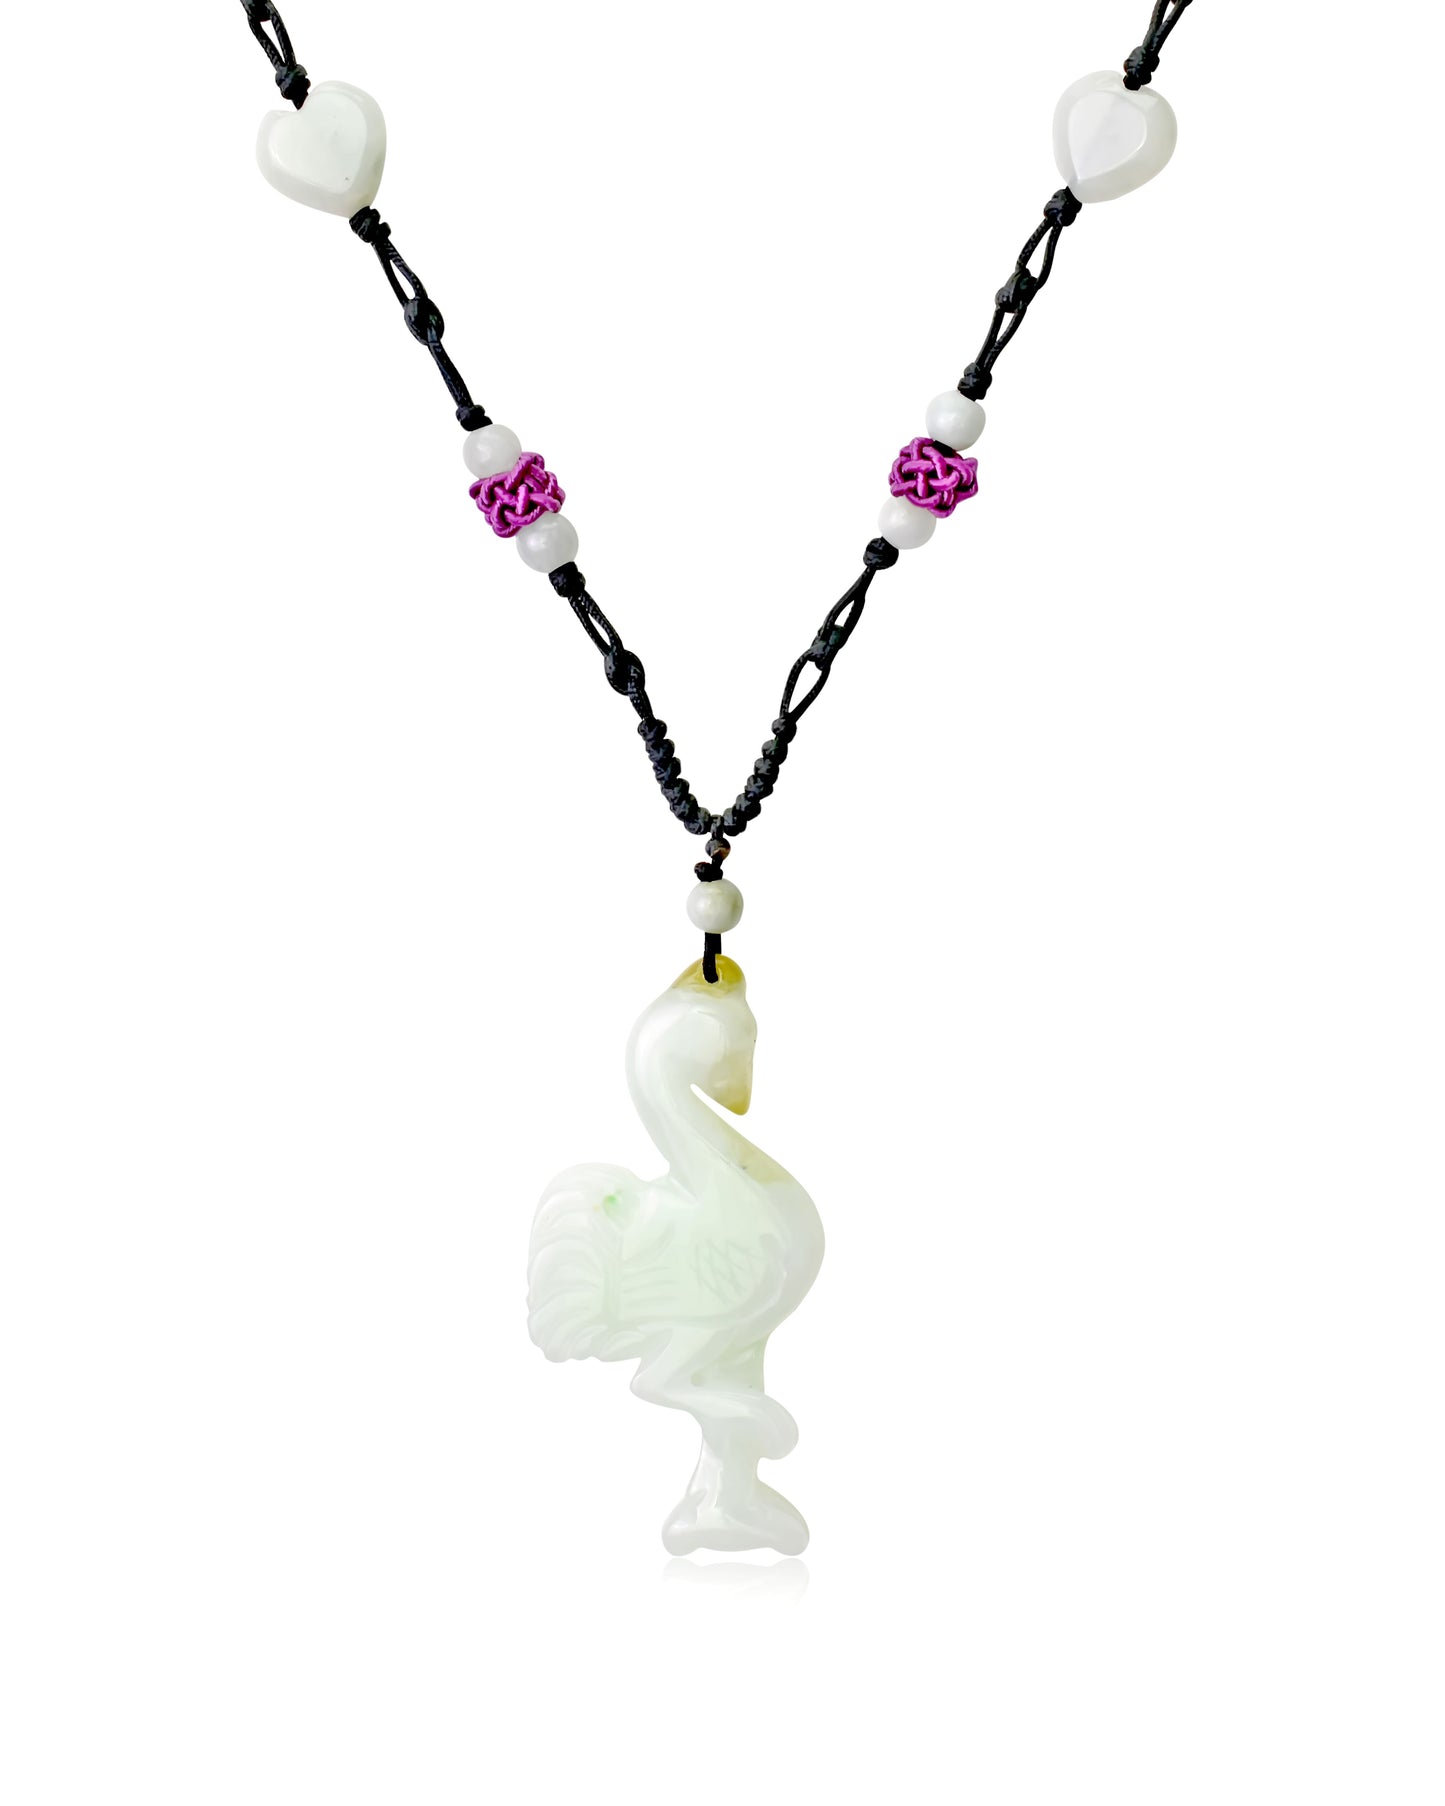 Add a Tropical Flair to Your Wardrobe with the Flamingo Jade Necklace made with Black Cord